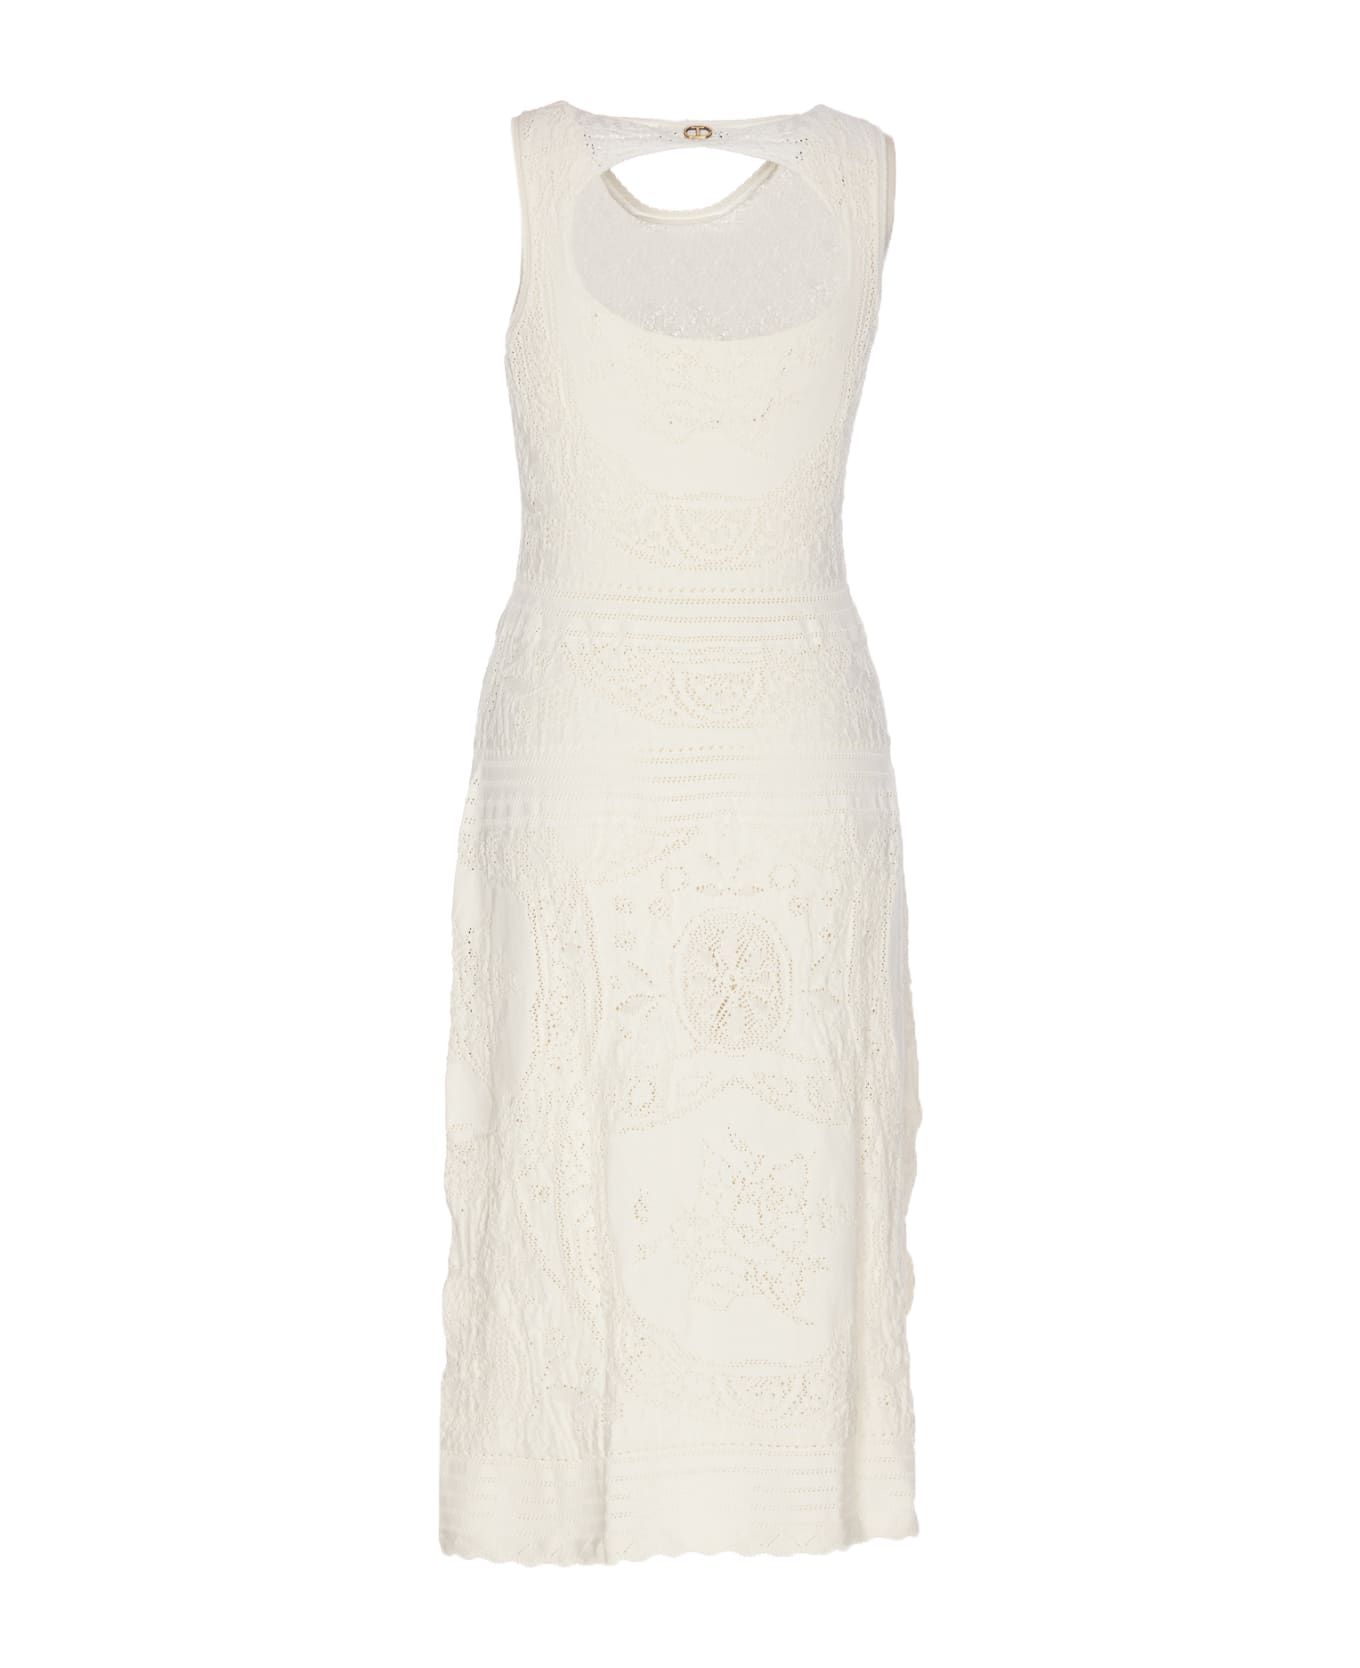 TwinSet Embroidered Dress - White